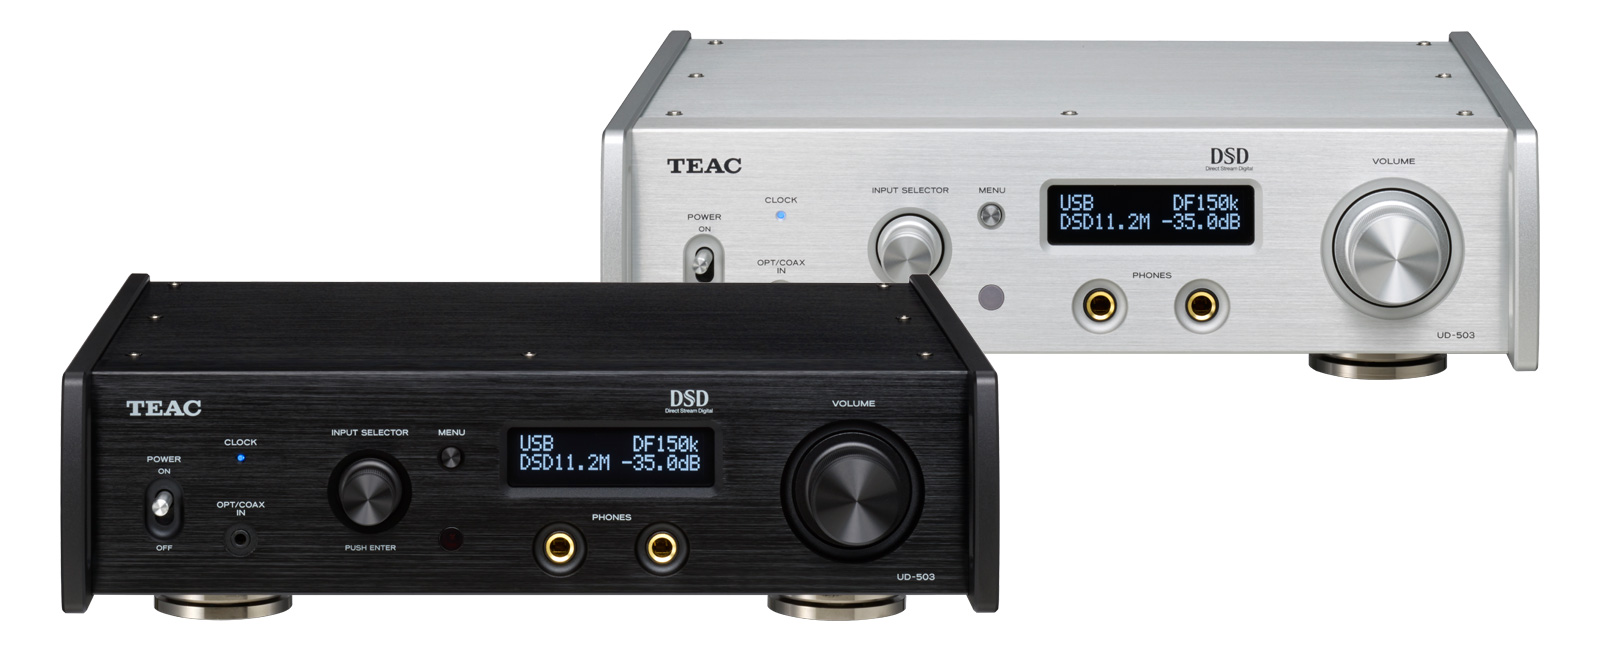 UD-503 | OVERVIEW | TEAC | International Website| | OVERVIEW 